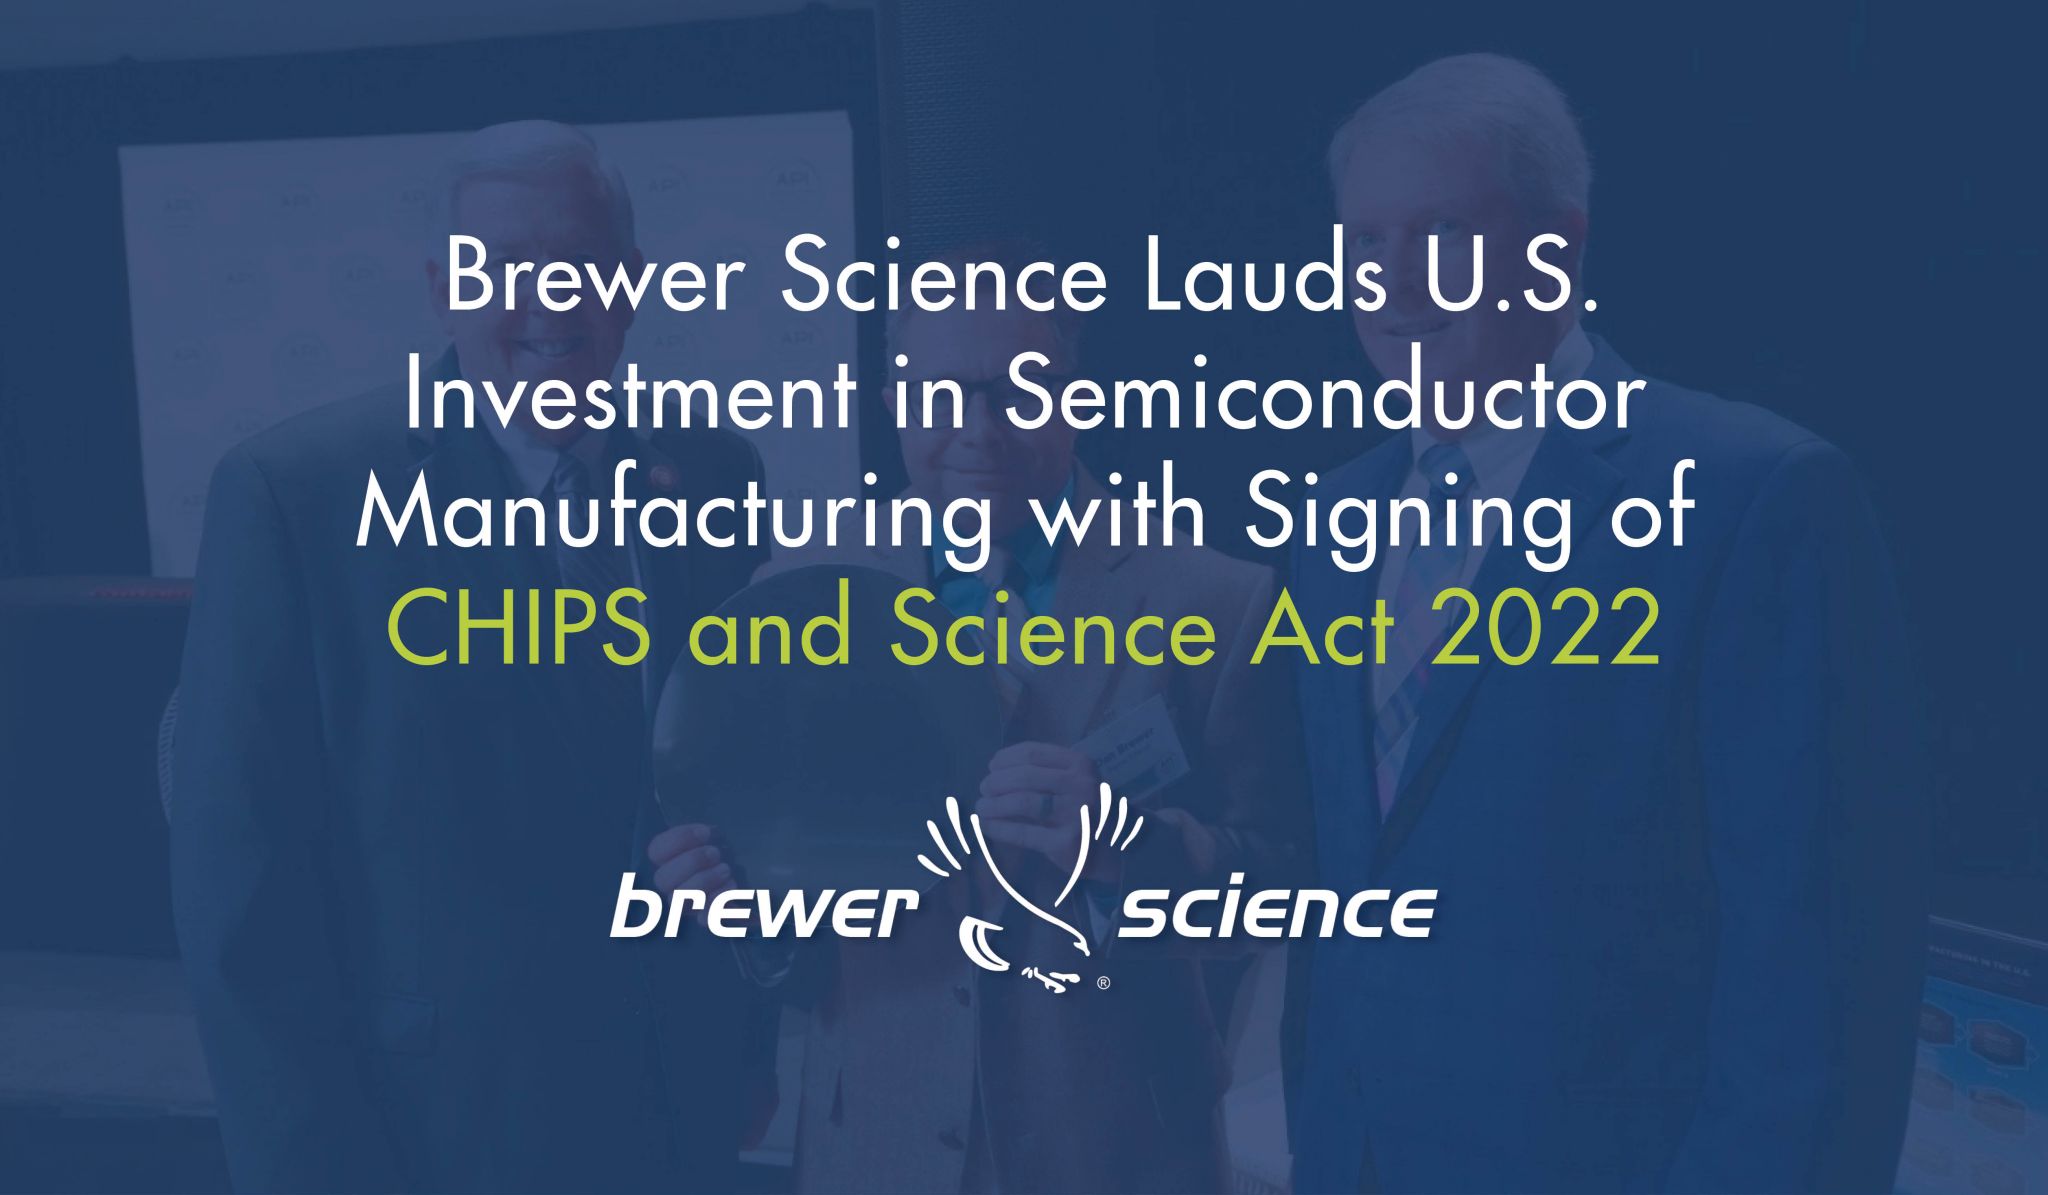 <strong>Brewer Science Lauds U.S. Investment in Semiconductor Manufacturing with Signing of CHIPS and Science Act